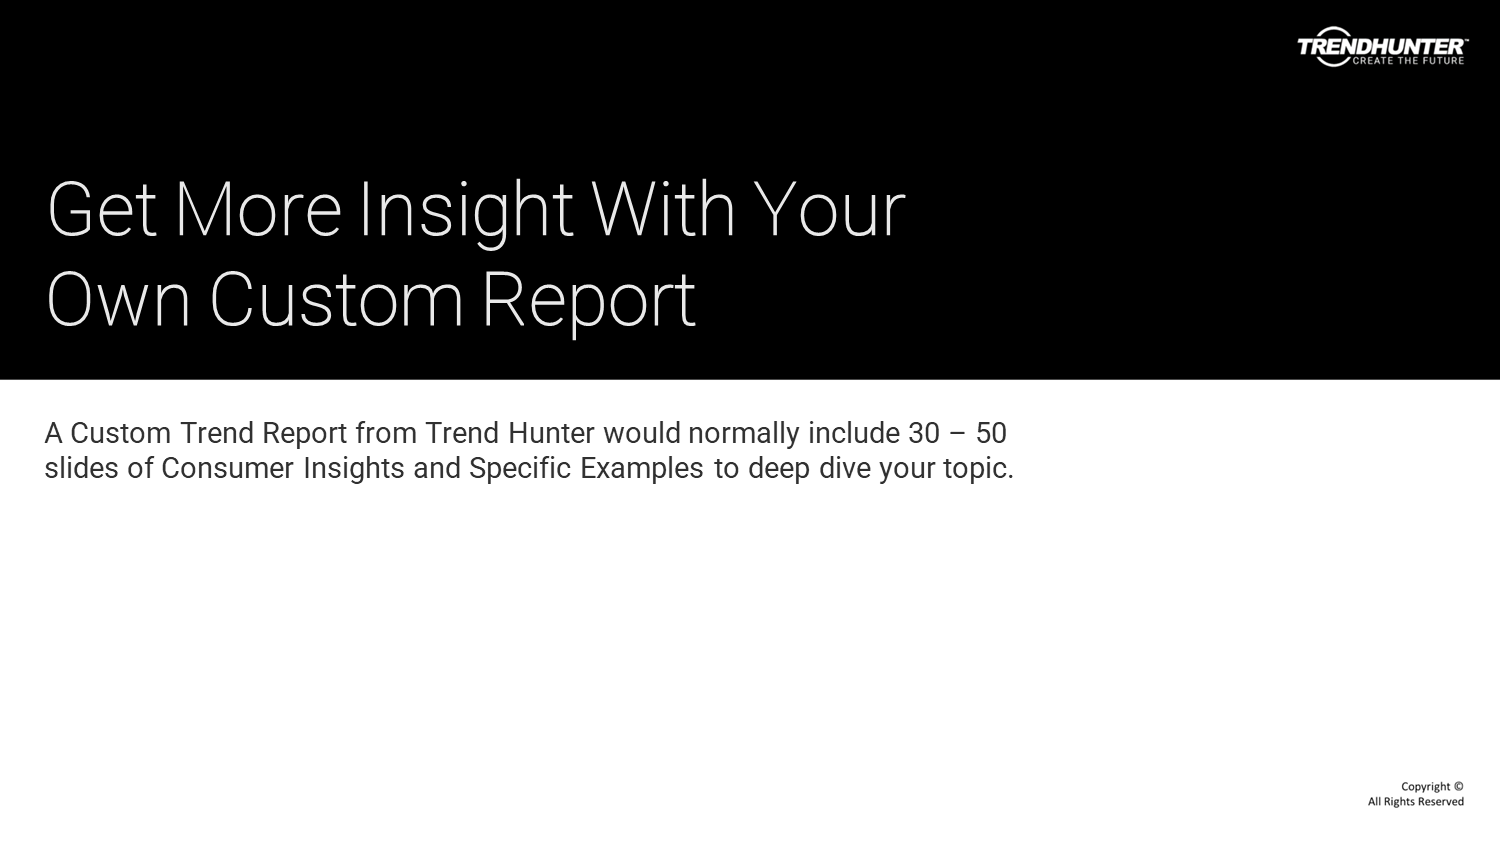 Image Slide: Full reports contain additional insights